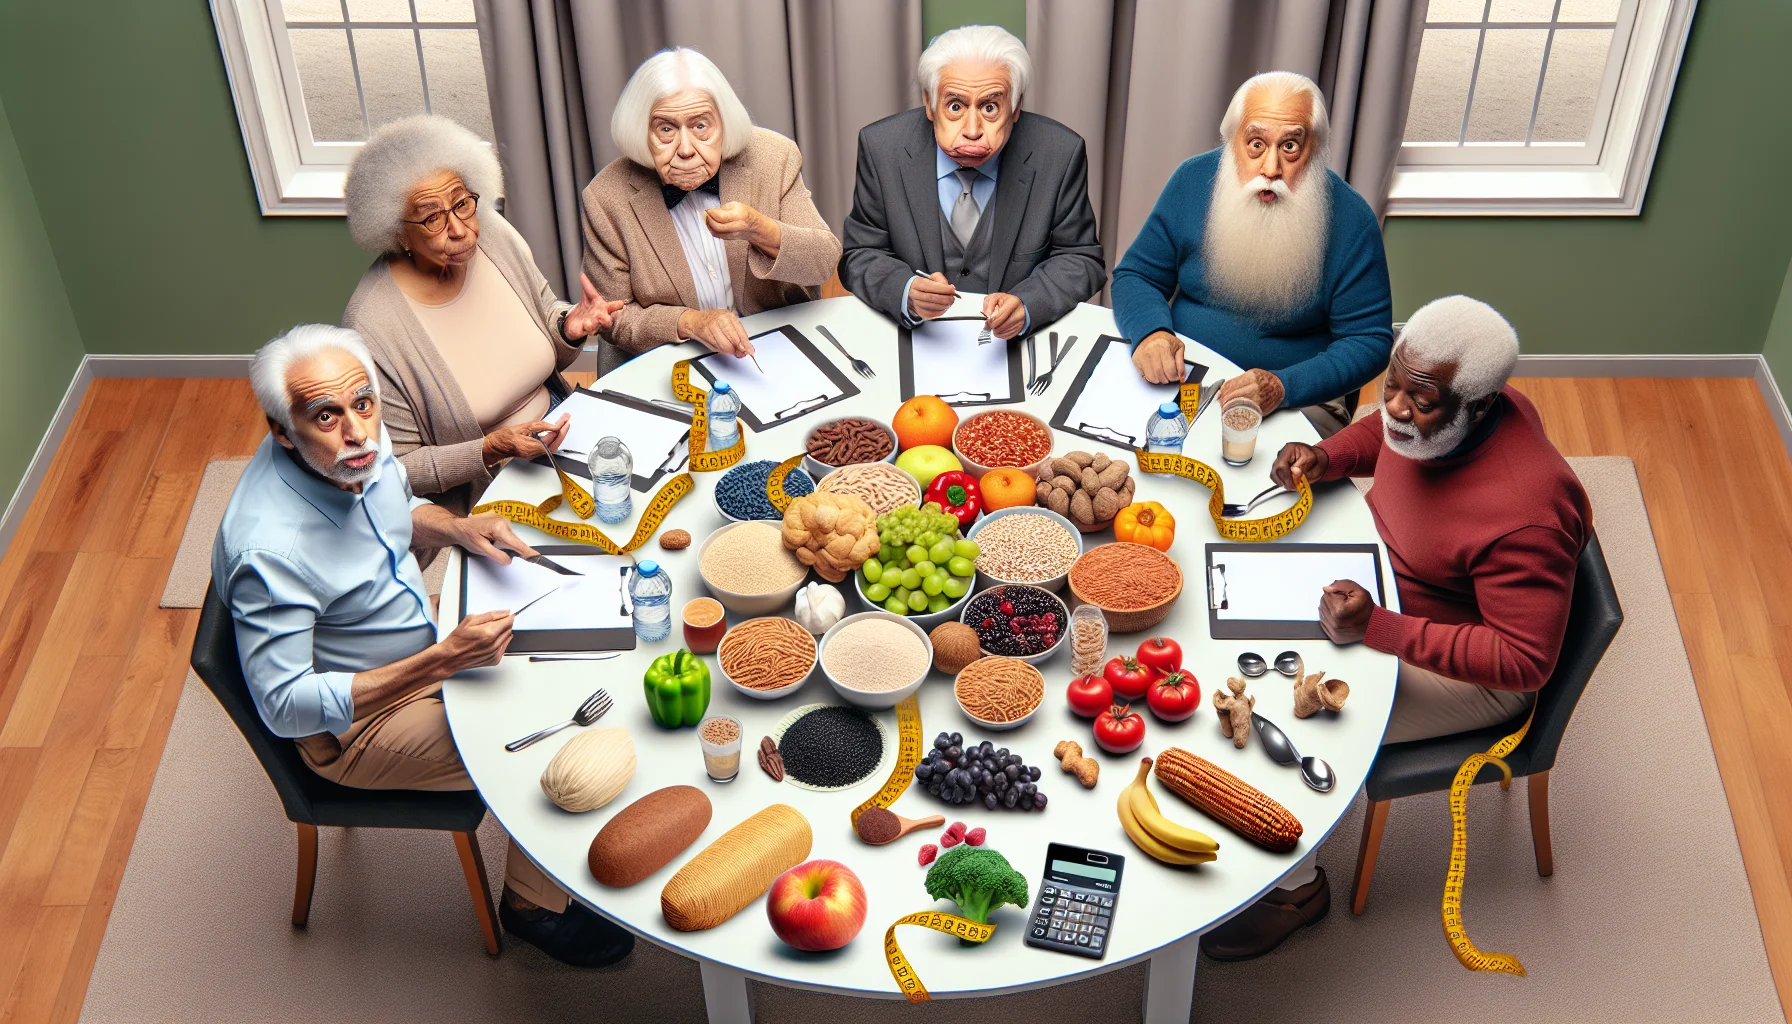 Create a humorous and realistic image displaying 30 grams of fiber. To add a touch of comedy, consider portraying the fiber in the form of common high-fiber foods, scattered all over a large dining table. Around the table, there are five elderly friends, each presenting varied descents: Middle-Eastern, Hispanic, South Asian, Caucasian, and Black. They look amused and slightly overwhelmed by the sheer amount of food. Each of them is holding different tools - measuring tapes, calculators, and diet guides - indicating their attempt to comprehend the concept of eating the recommended dietary fiber.